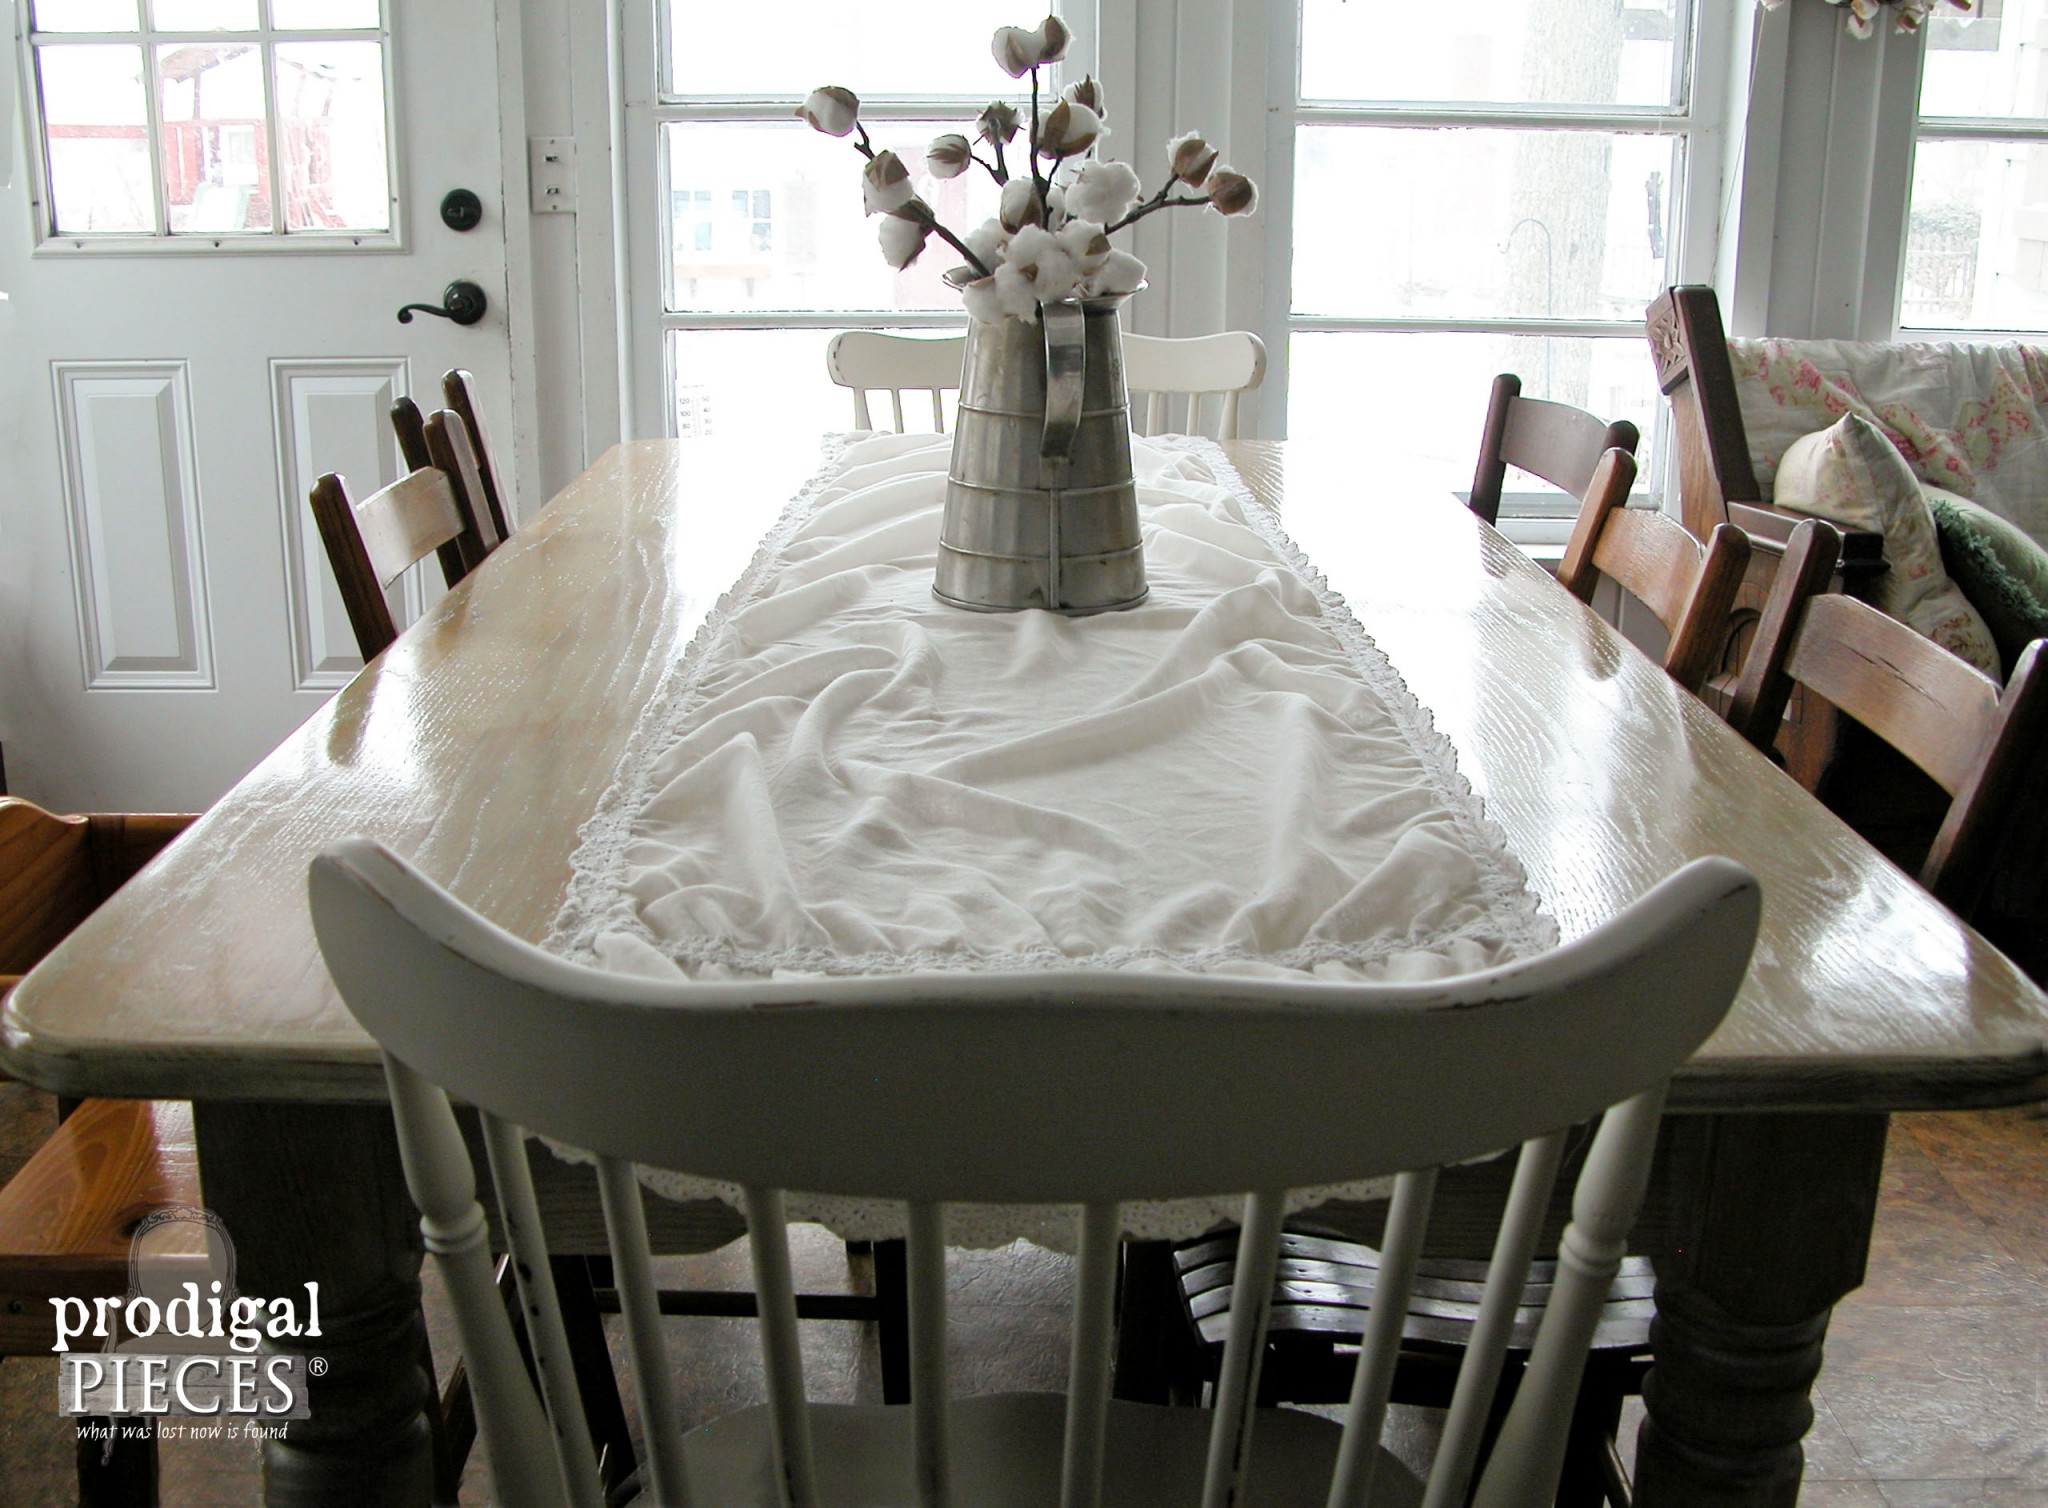 Farmhouse Table with Whitewashed by Prodigal Pieces | prodigalpieces.com